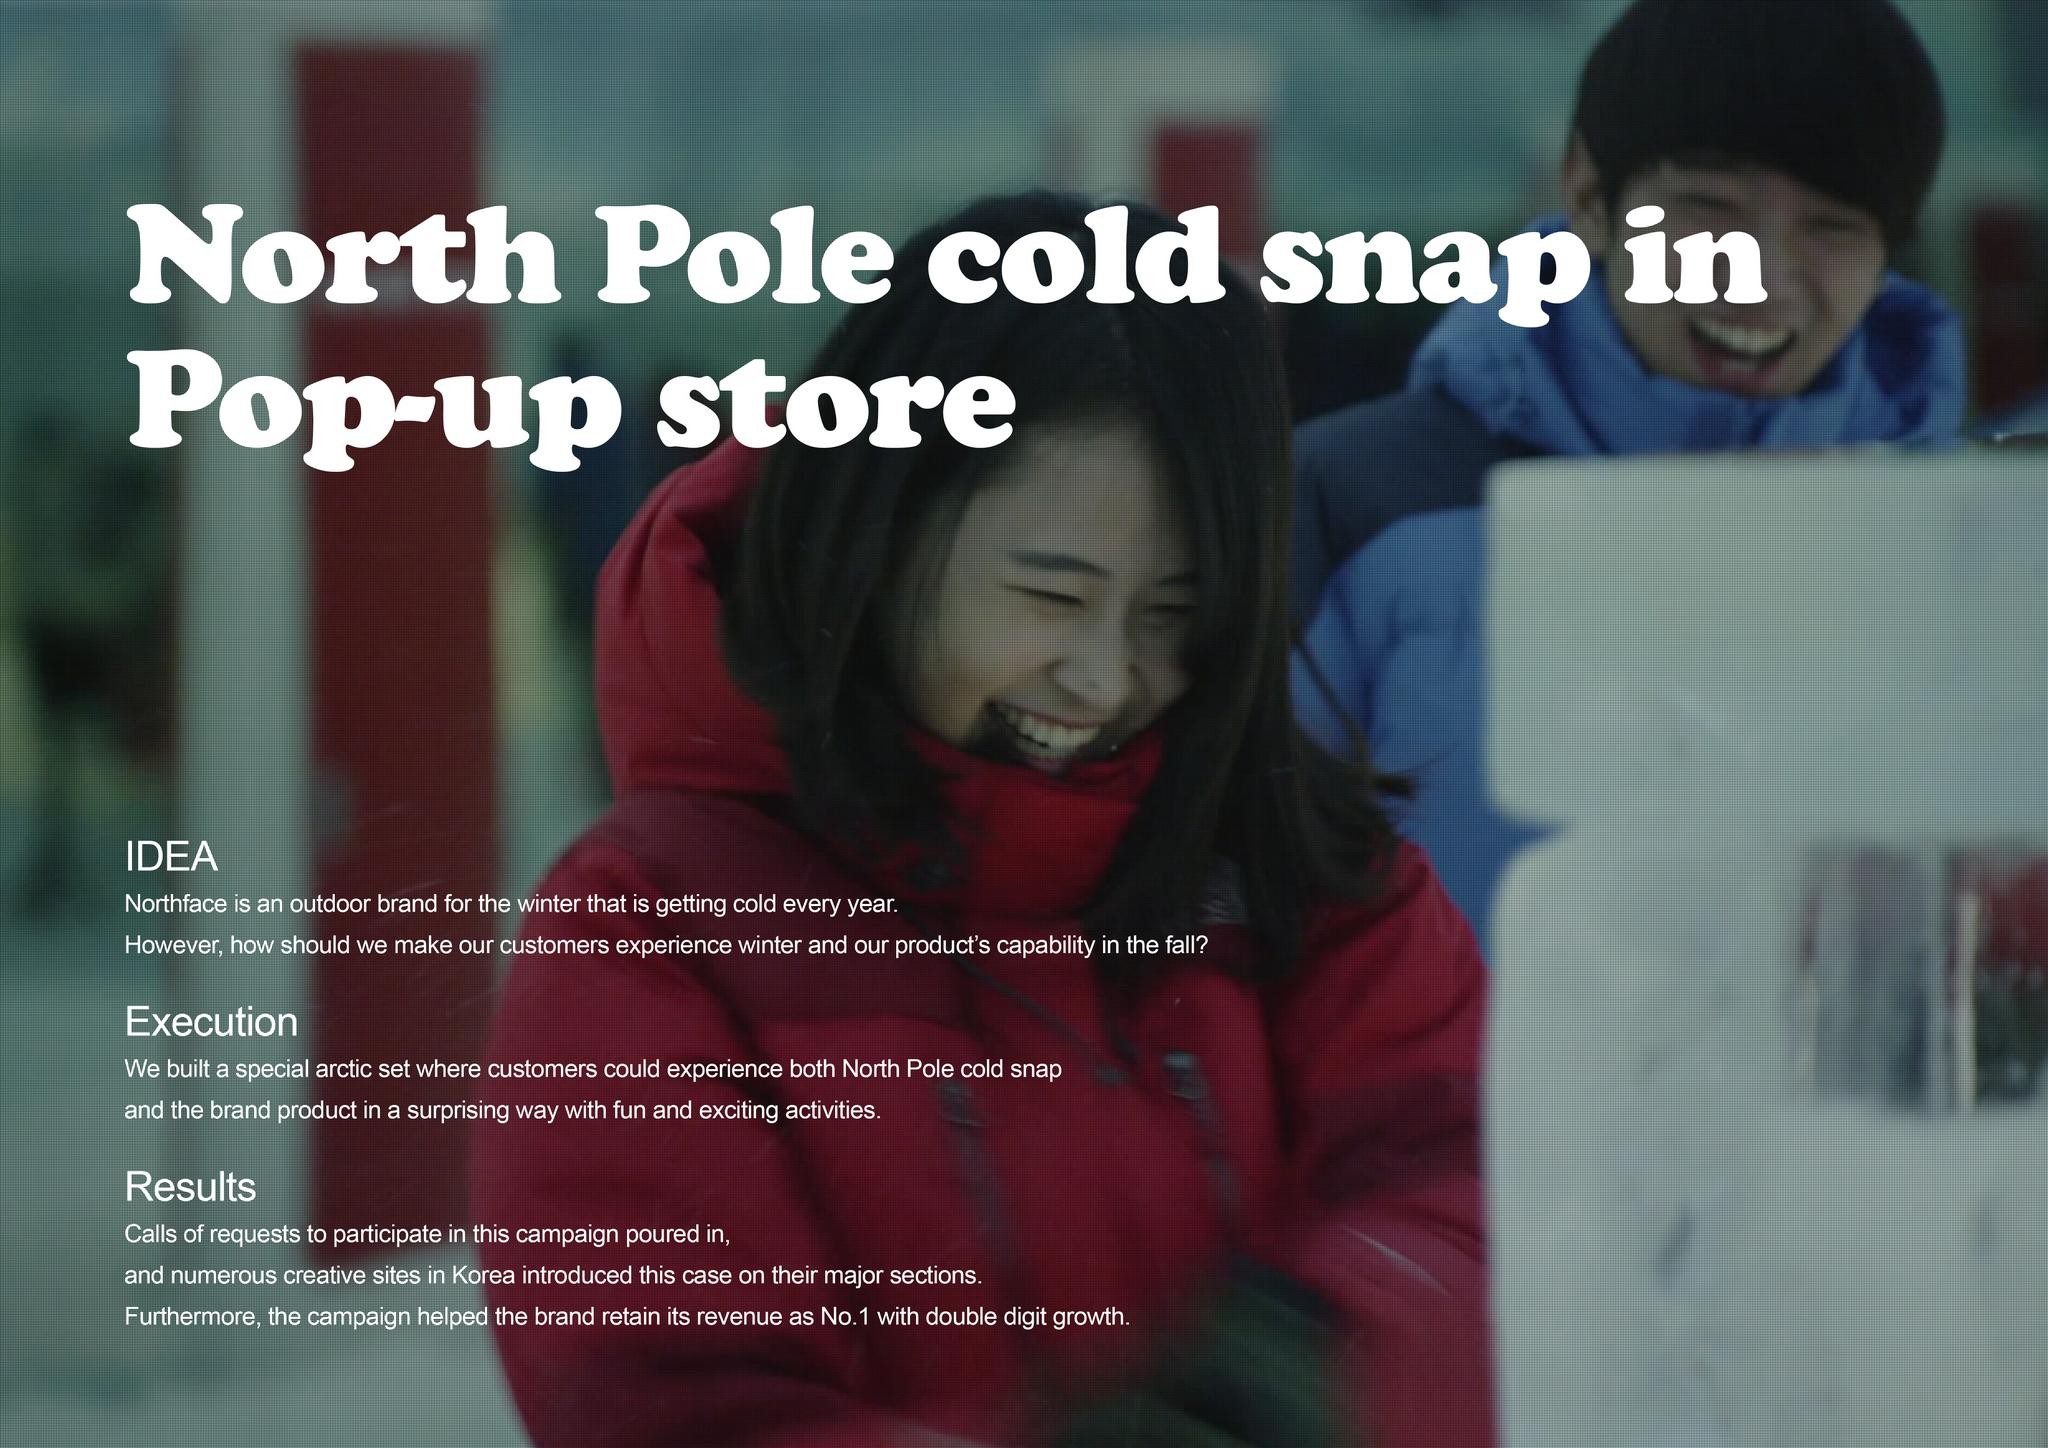 NORTH POLE COLD SNAP IN POP-UP STORE